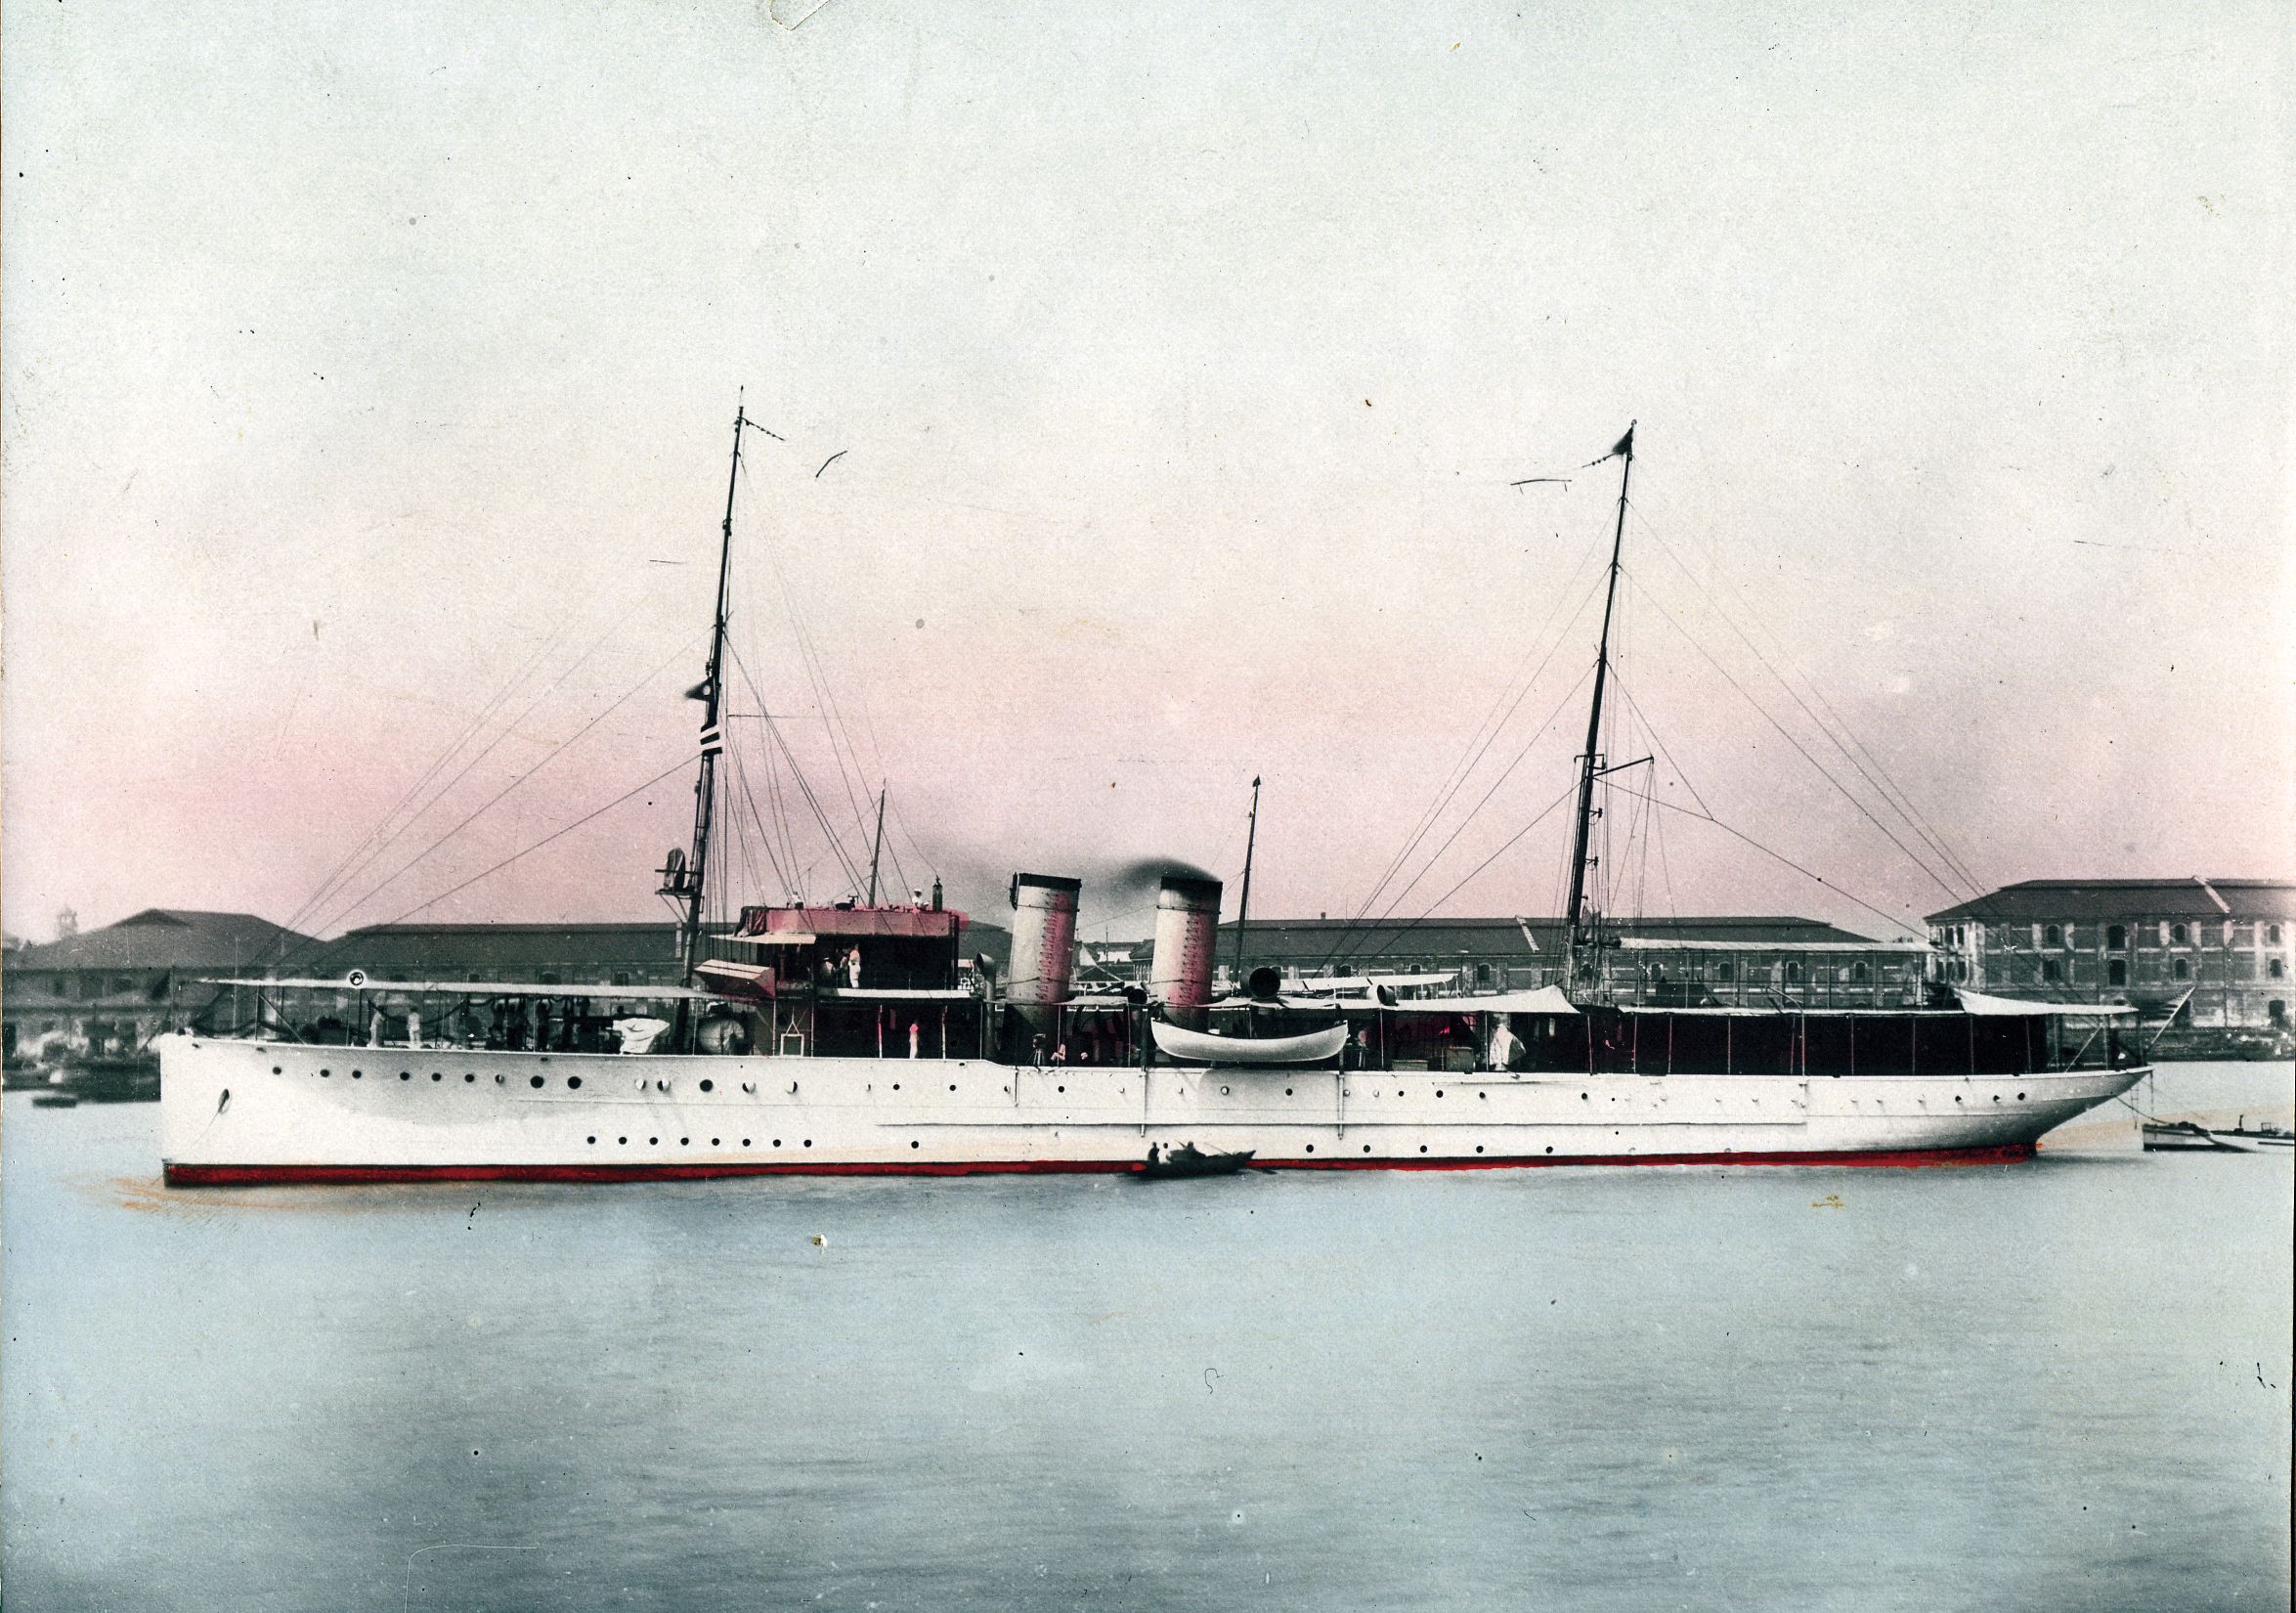 The converted yacht Isabel set sail from the harbor at Manila on December 3, 1941, and was harassed by Japanese aircraft during a clandestine voyage. The Isabel was not expected to return to Manila by those who ordered her sortie. 